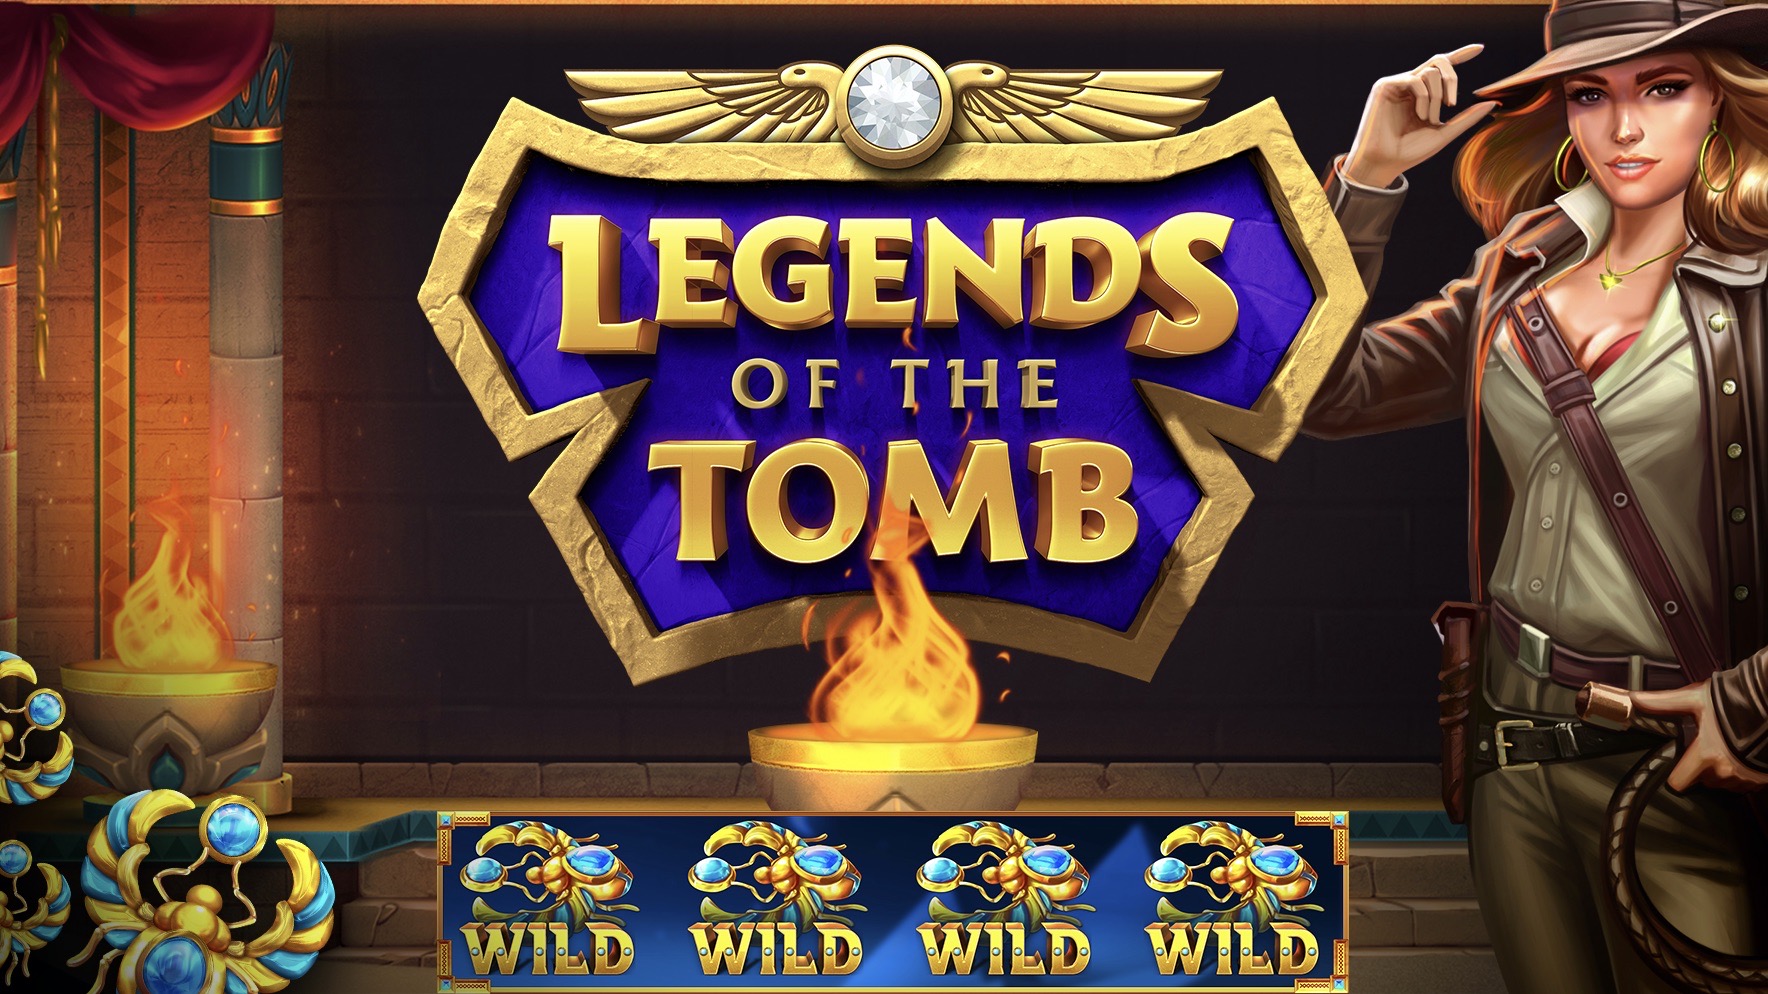 Legends of the Tomb is a 6x3-4, 75-payline video slot with features including stacked wilds, a wheel bonus and free games.